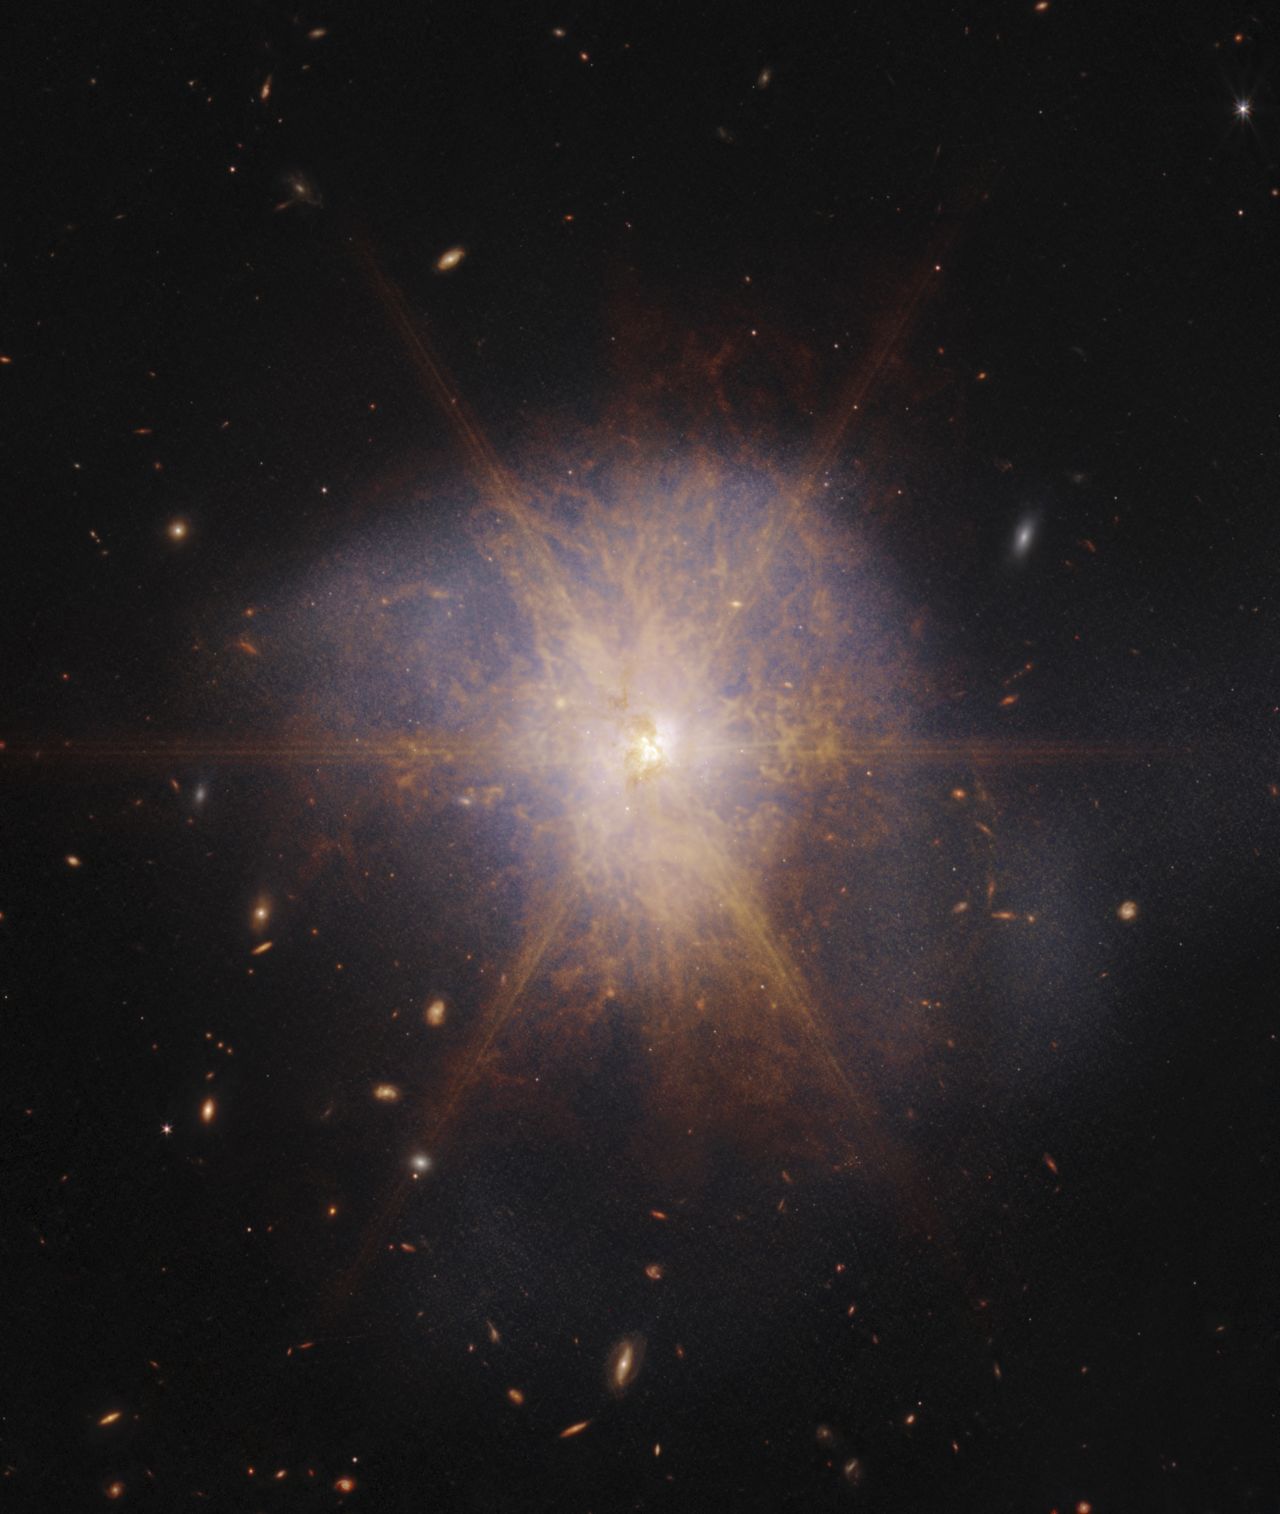 This image, taken by the James Webb Space Telescope and released on Monday, April 17, captures a bright burst of star formation that was triggered by <a href="https://www.cnn.com/2023/04/17/world/webb-telescope-starburst-galaxy-merger-scn/index.html" target="_blank">two spiral galaxies crashing into each other</a>. The colliding galleries, known collectively as Arp 220, generated an infrared glow containing the light of more than 1 trillion suns.